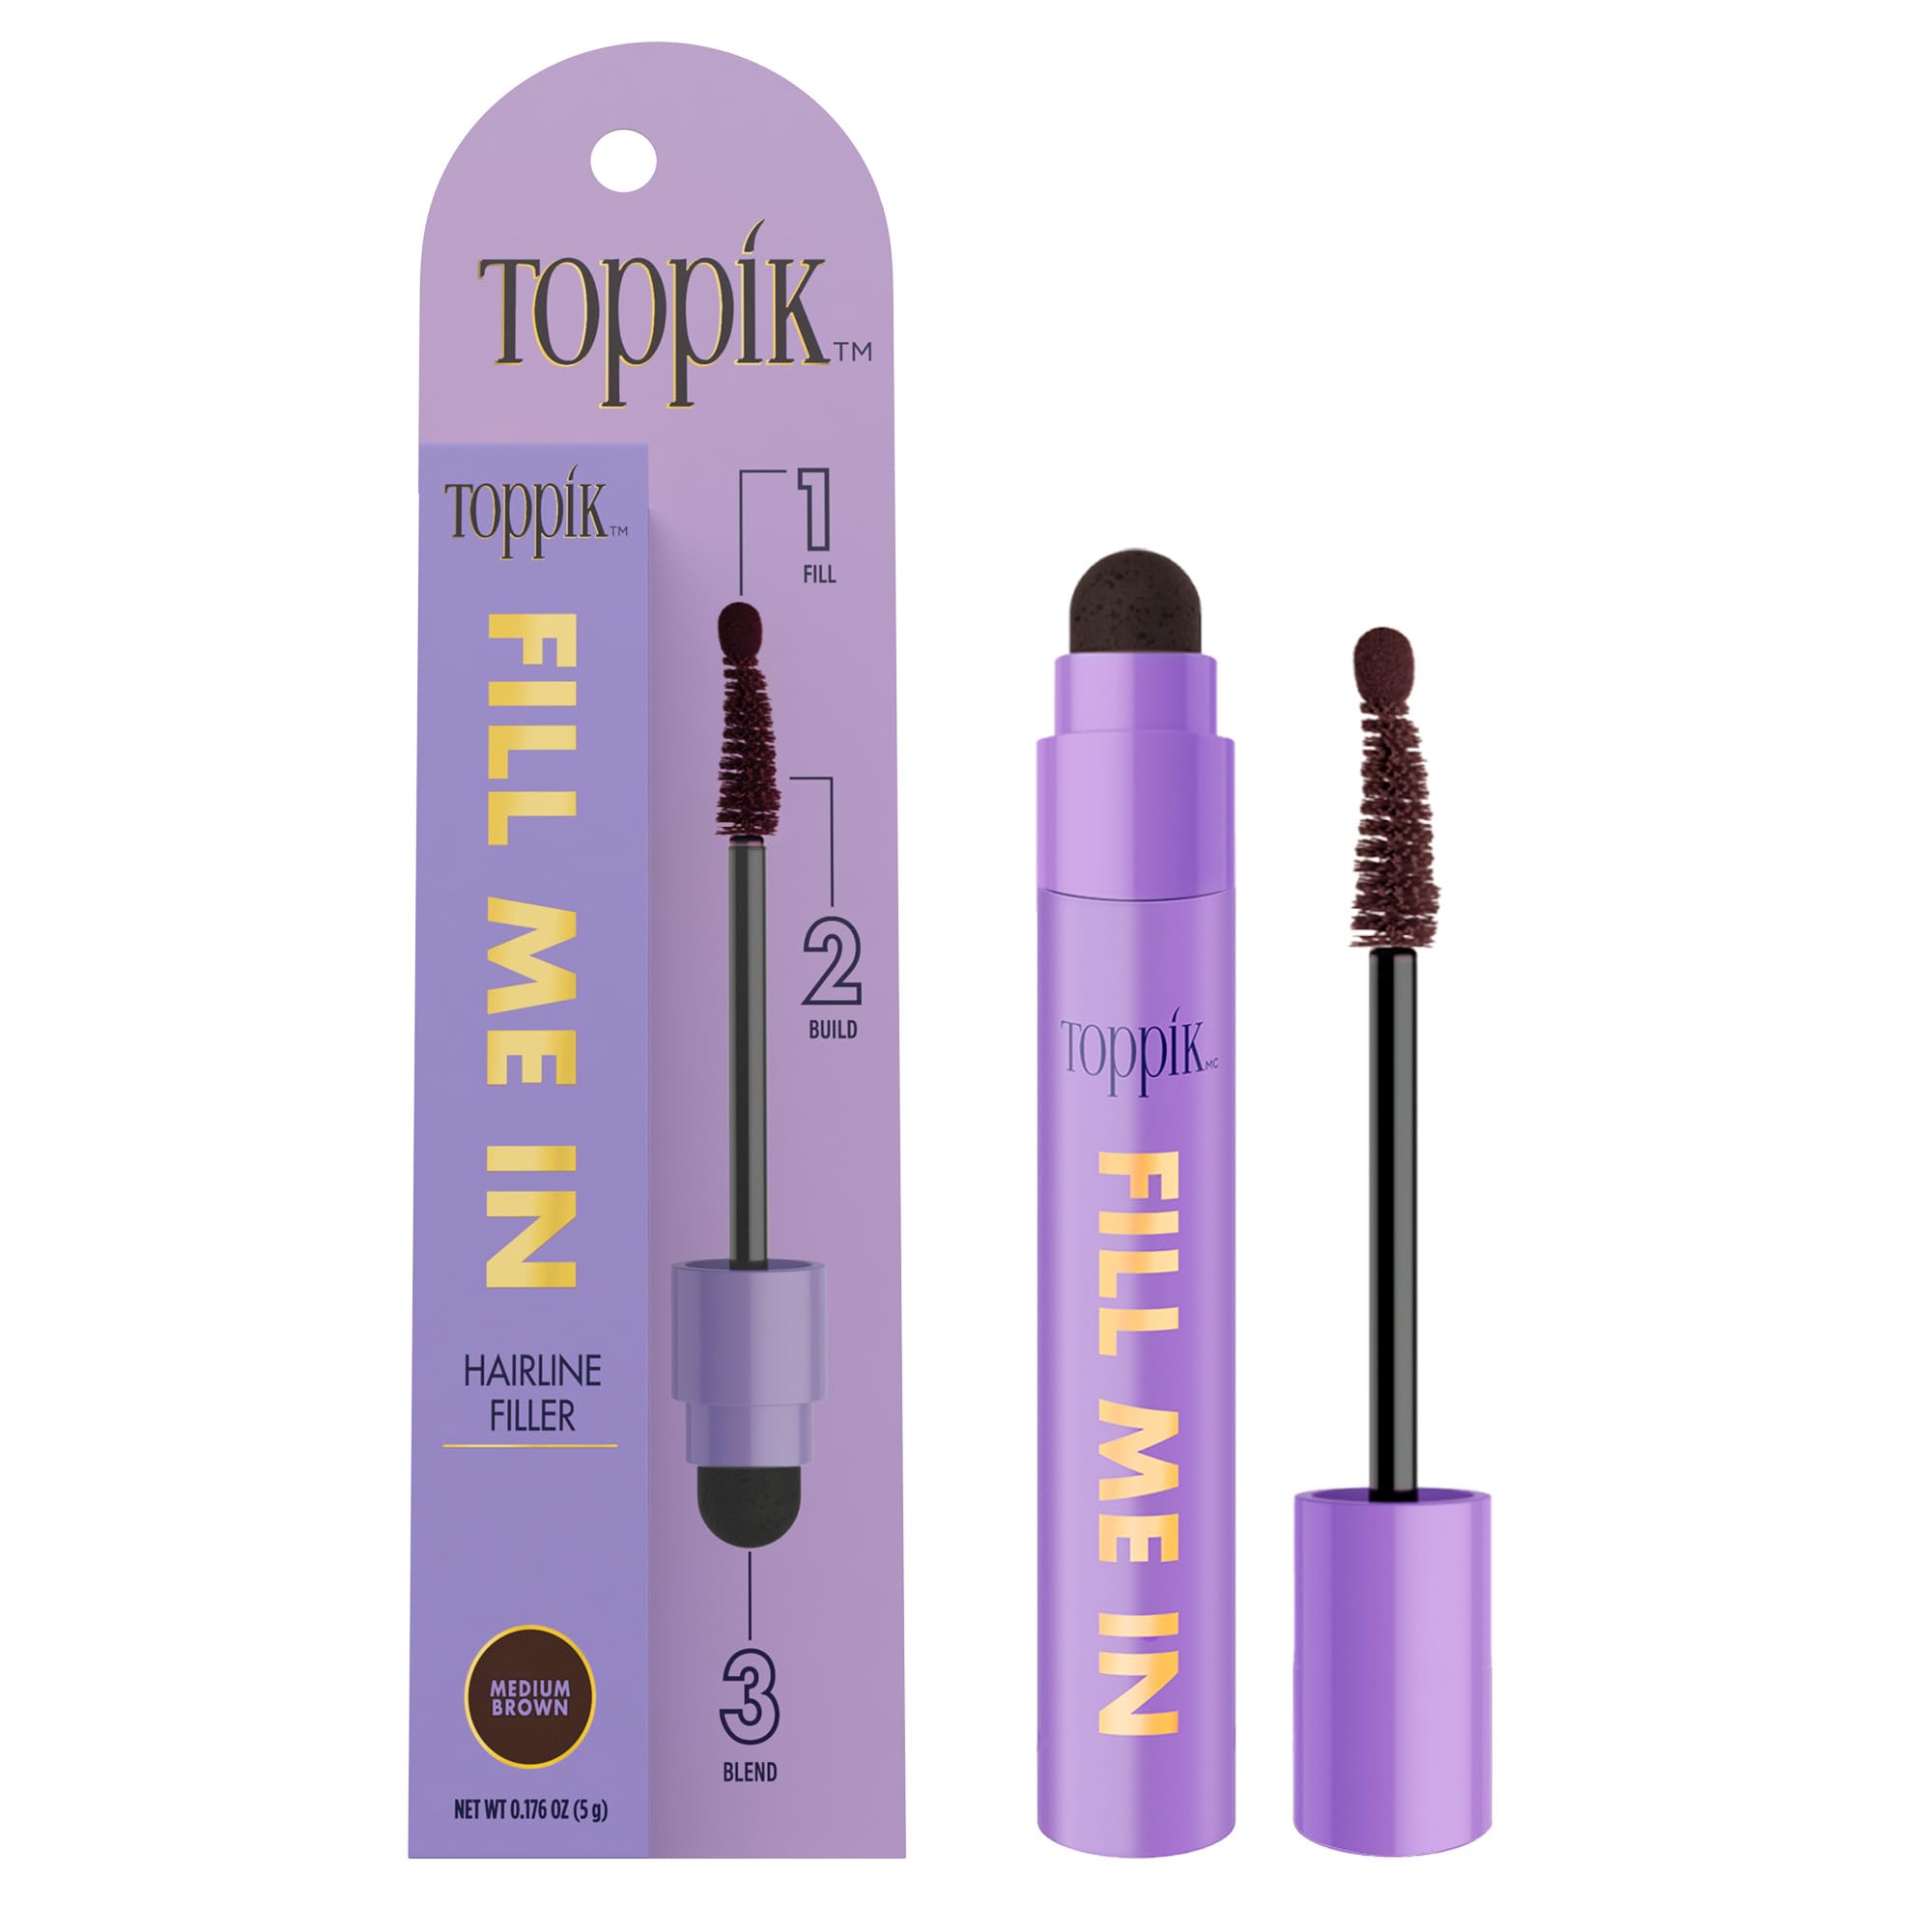 Toppik Fill Me In Hairline Filler, Hair Color Root Touchup, Hair Fibers Wand, Fills In Thinning Hairline, Hair Styling Product, 0.176 oz (5 g) Medium Brow